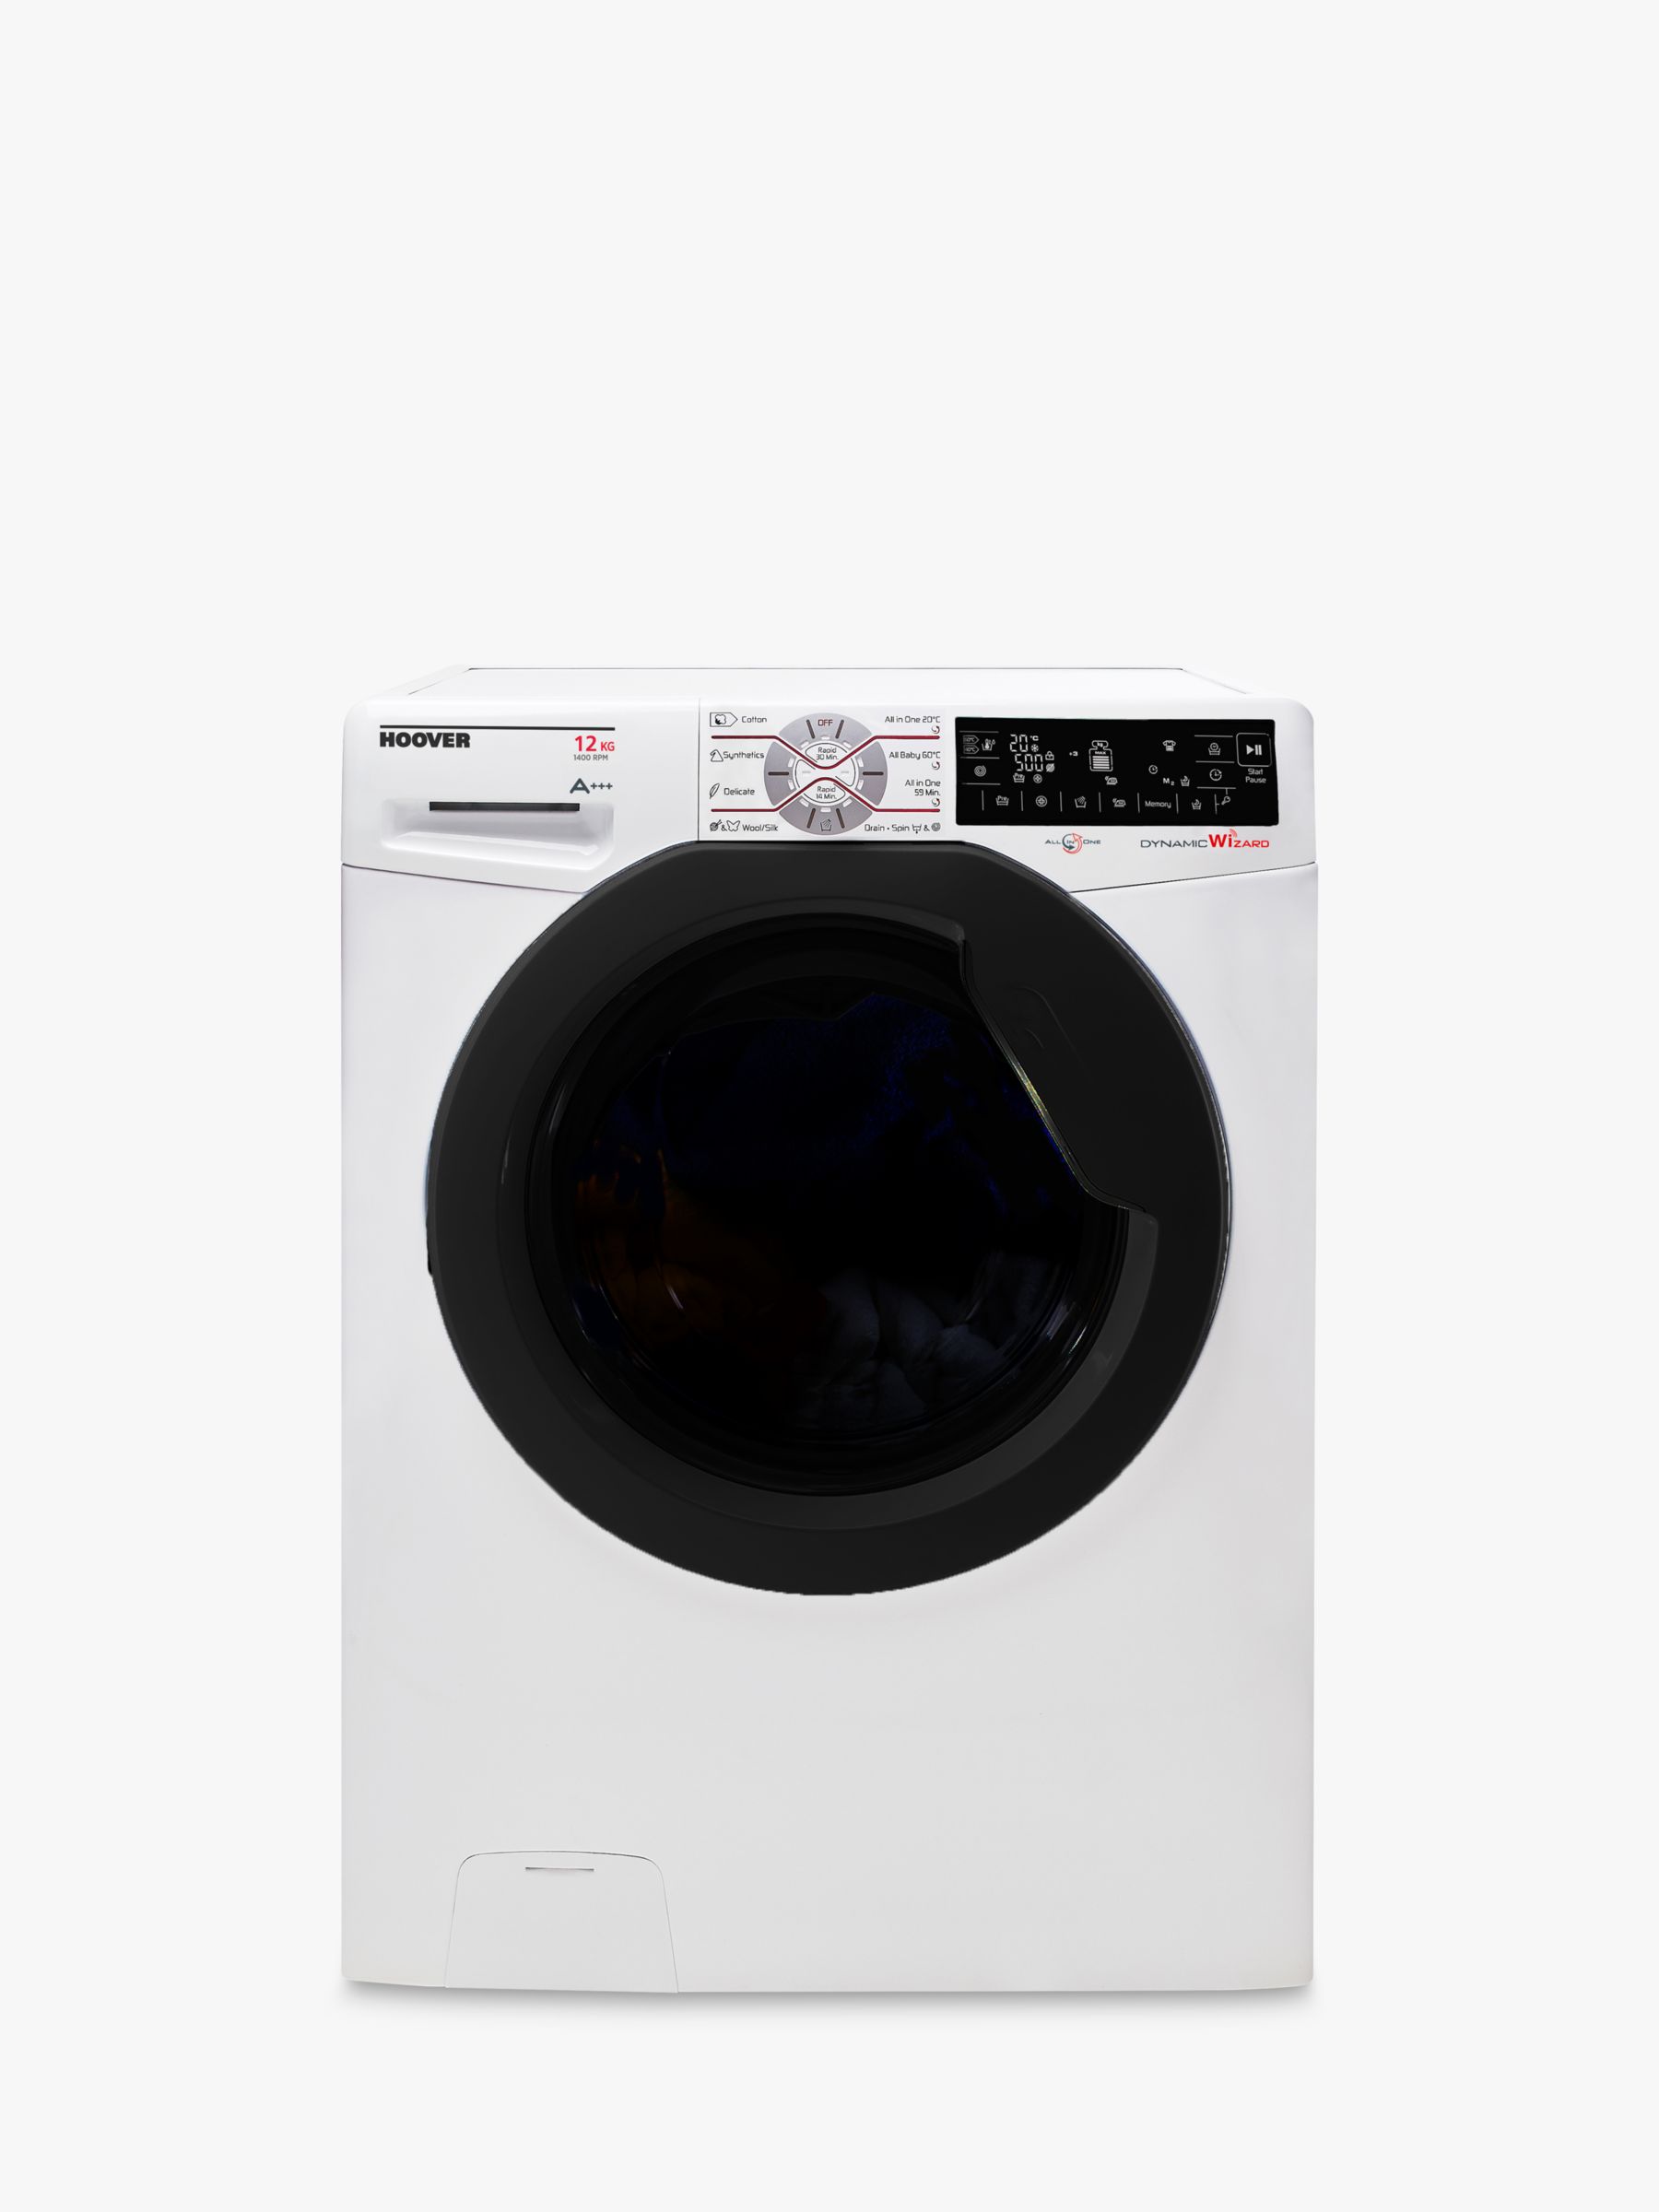 Hoover DWFT412AH3 Freestanding Washing Machine, 12kg Load, A+++ Energy Rating, 1400rpm Spin, White